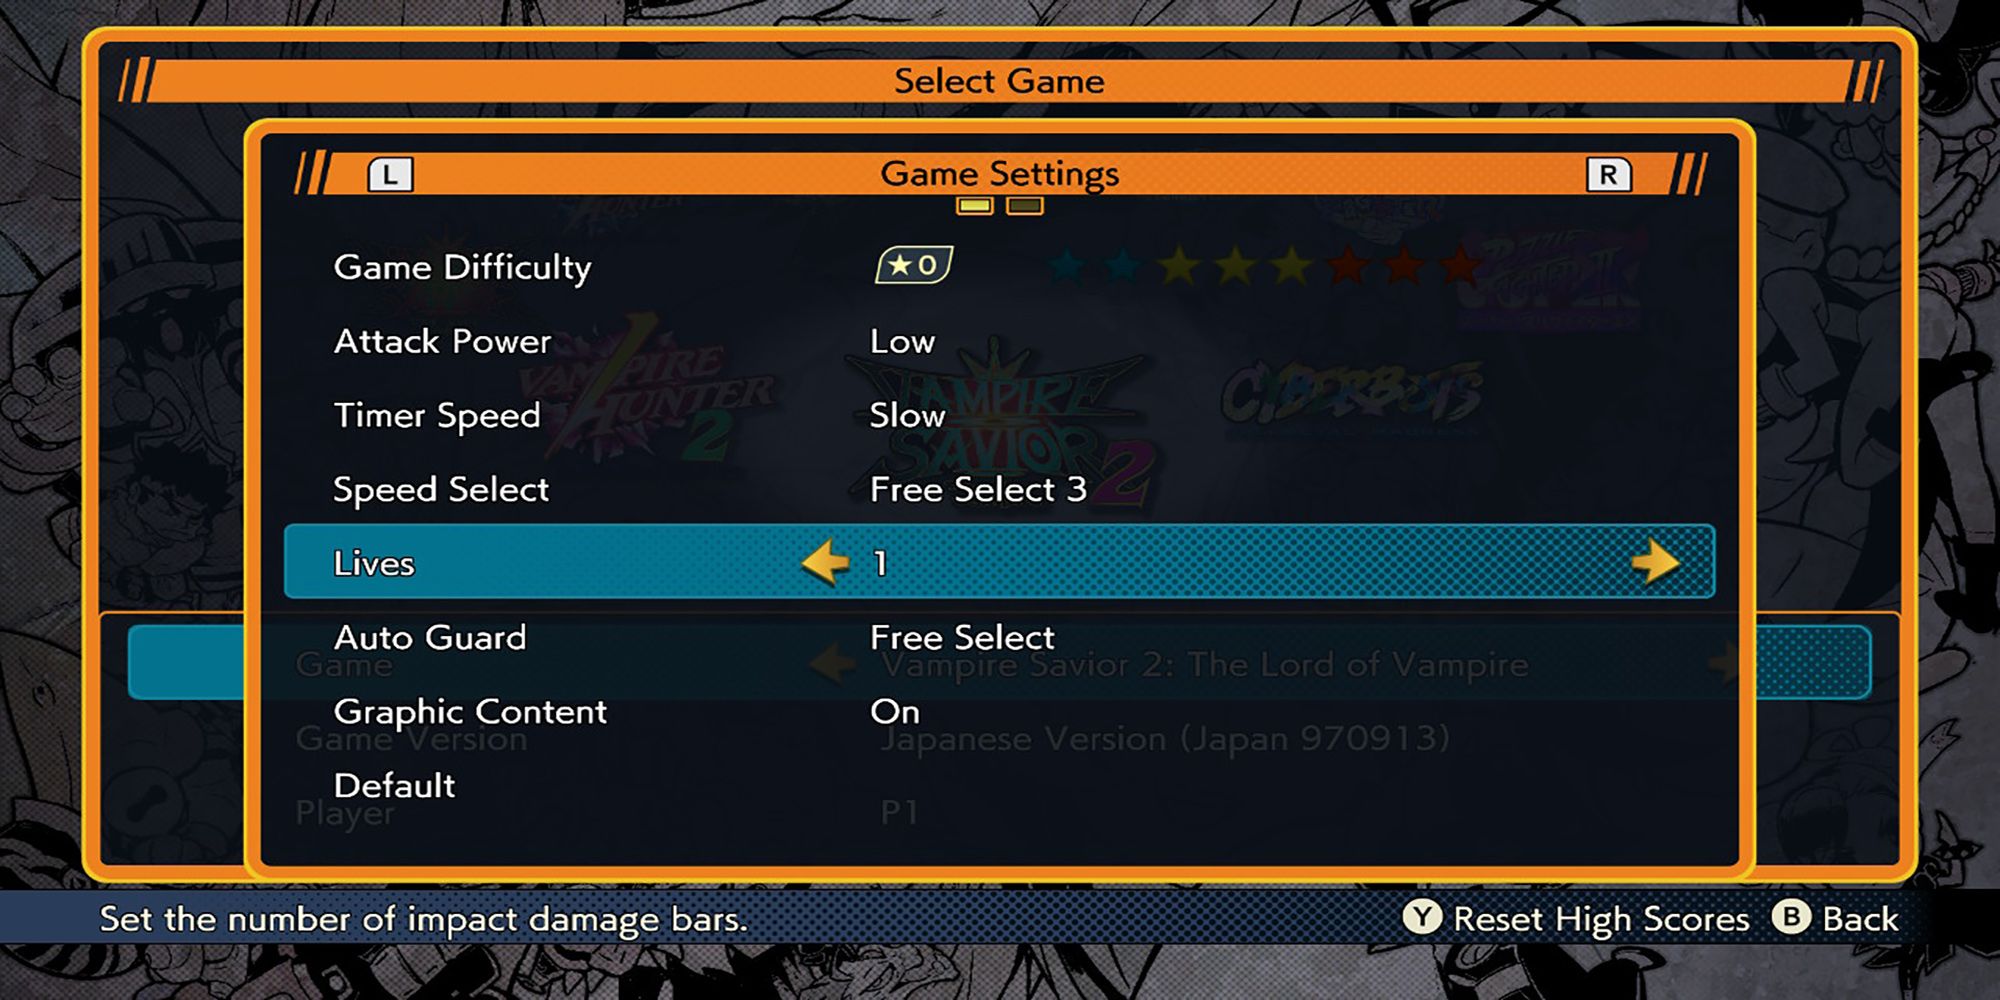 Adjusted game settings with lower difficulty, attack power, timer speed, and life stocks for Vampire Savior 2 in Capcom Fighting Collection.